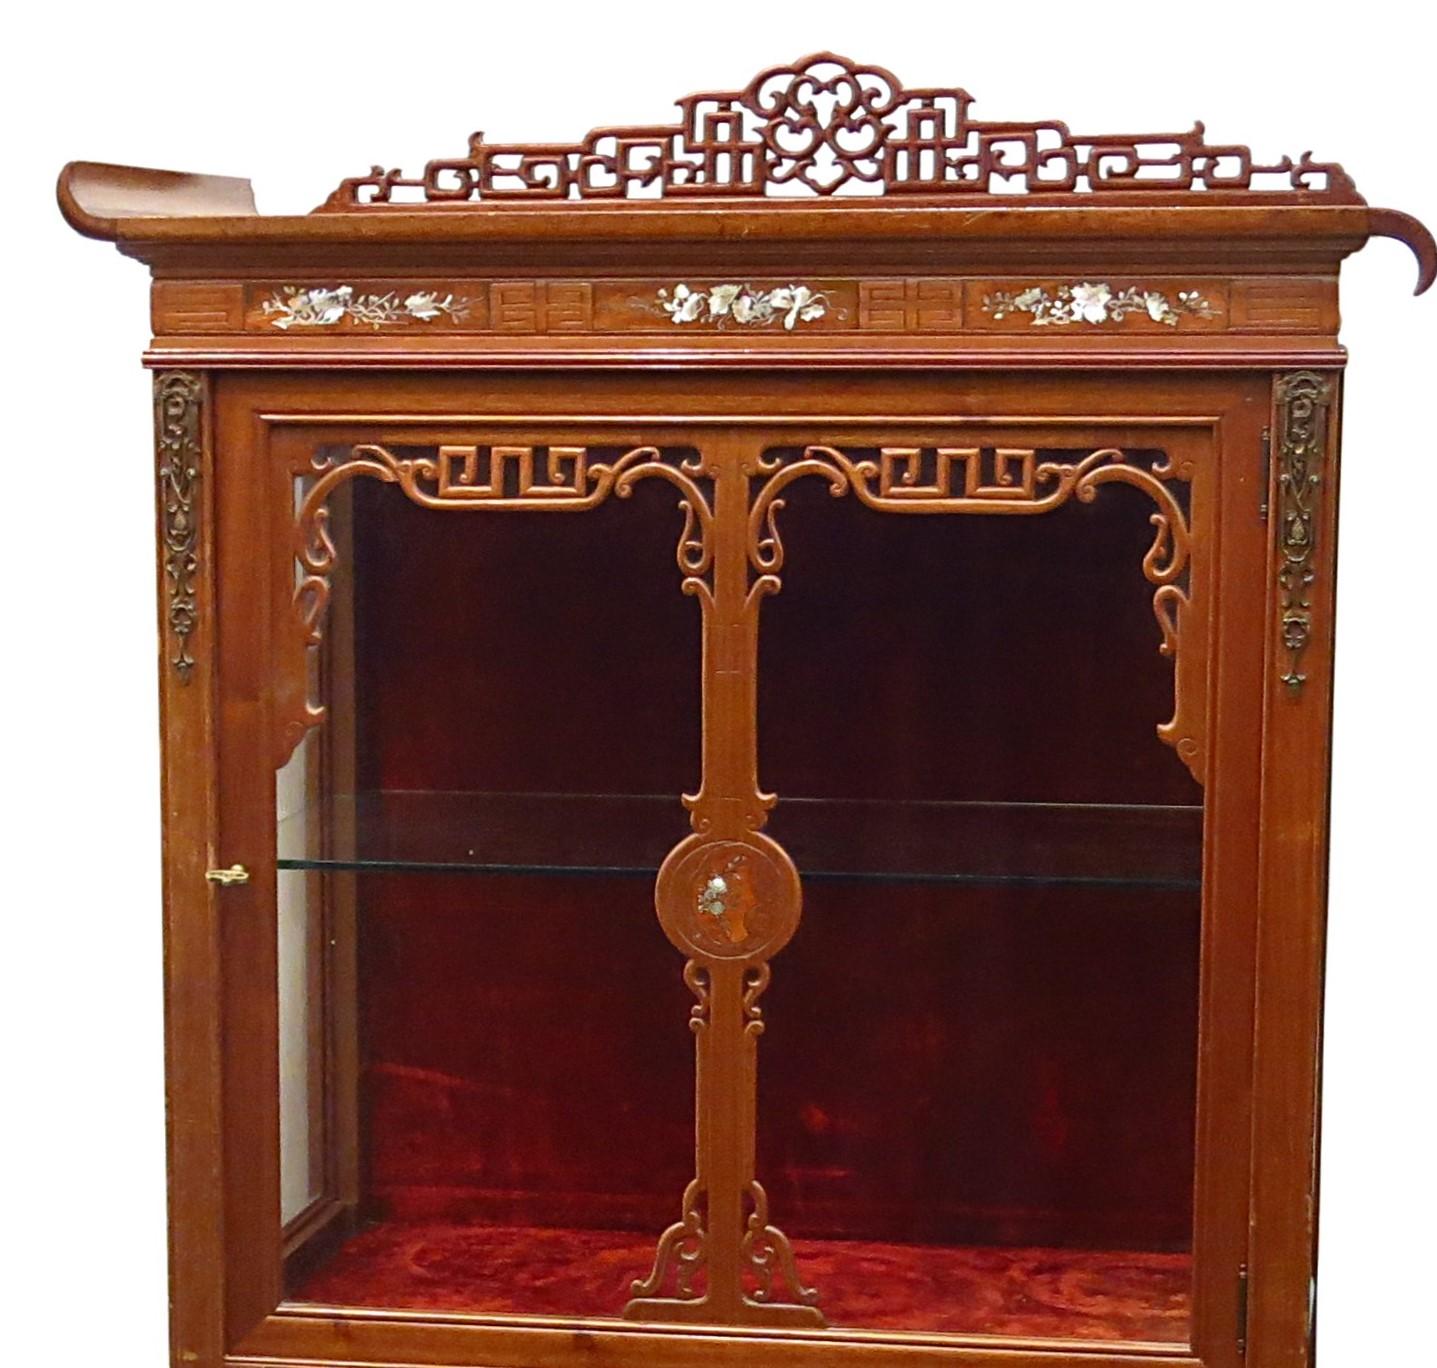 Very fine Chinese-style mahogany display case, opening with a door located on its upper part and two doors on its lower part. Provided with a glass shelf in order to display collector's items. Upper part is inlaid with mother of pearl designed in a